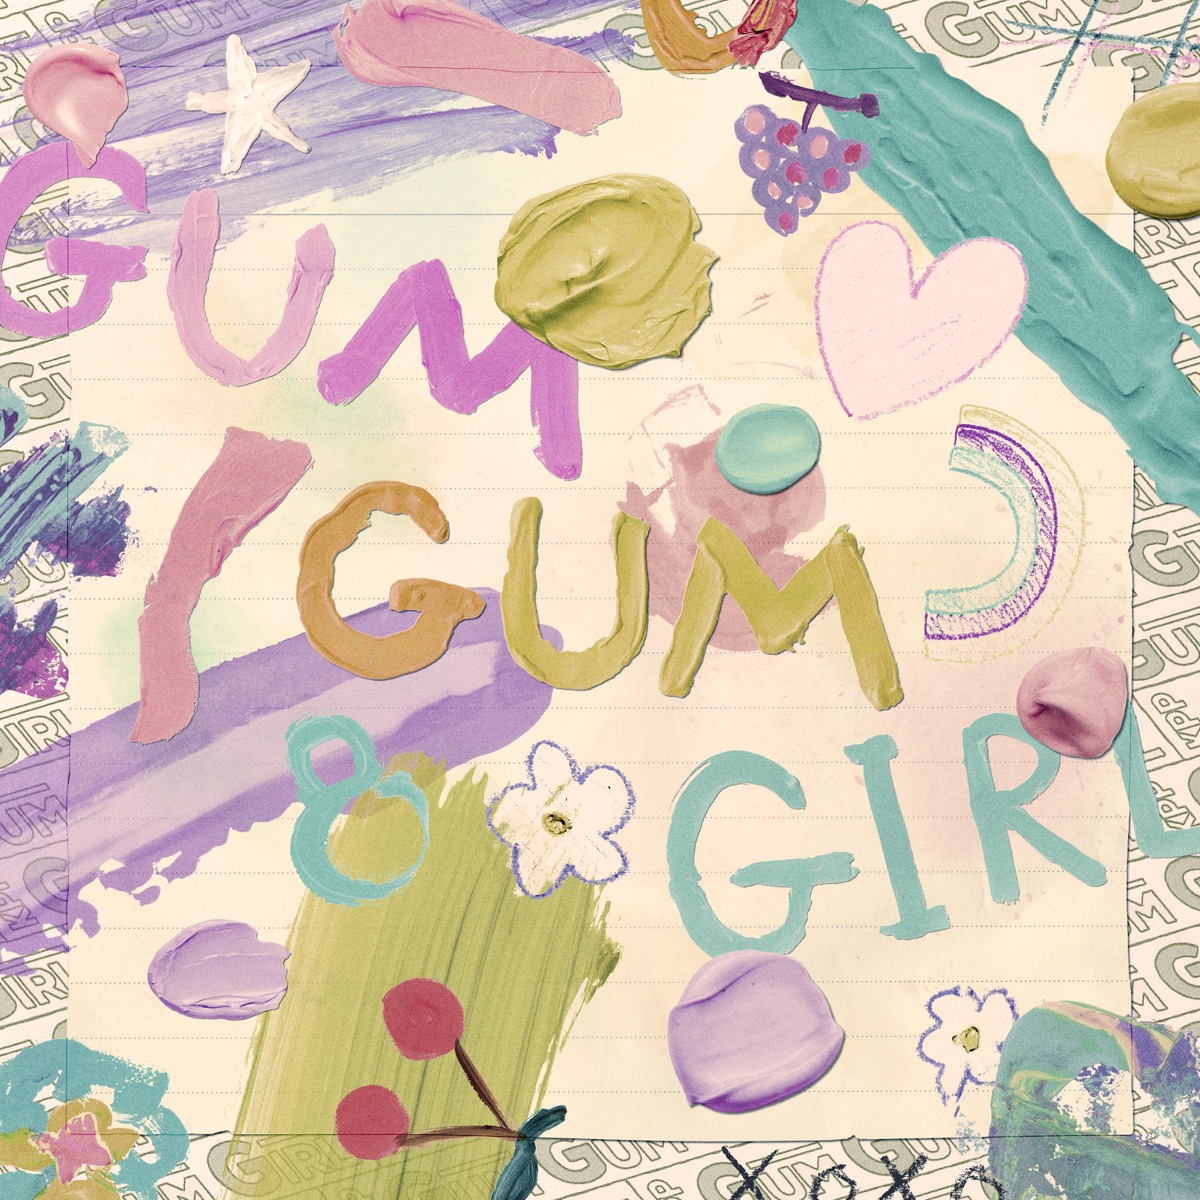 Cover art for『Kyary Pamyu Pamyu - GUM GUM GIRL』from the release『GUM GUM GIRL』